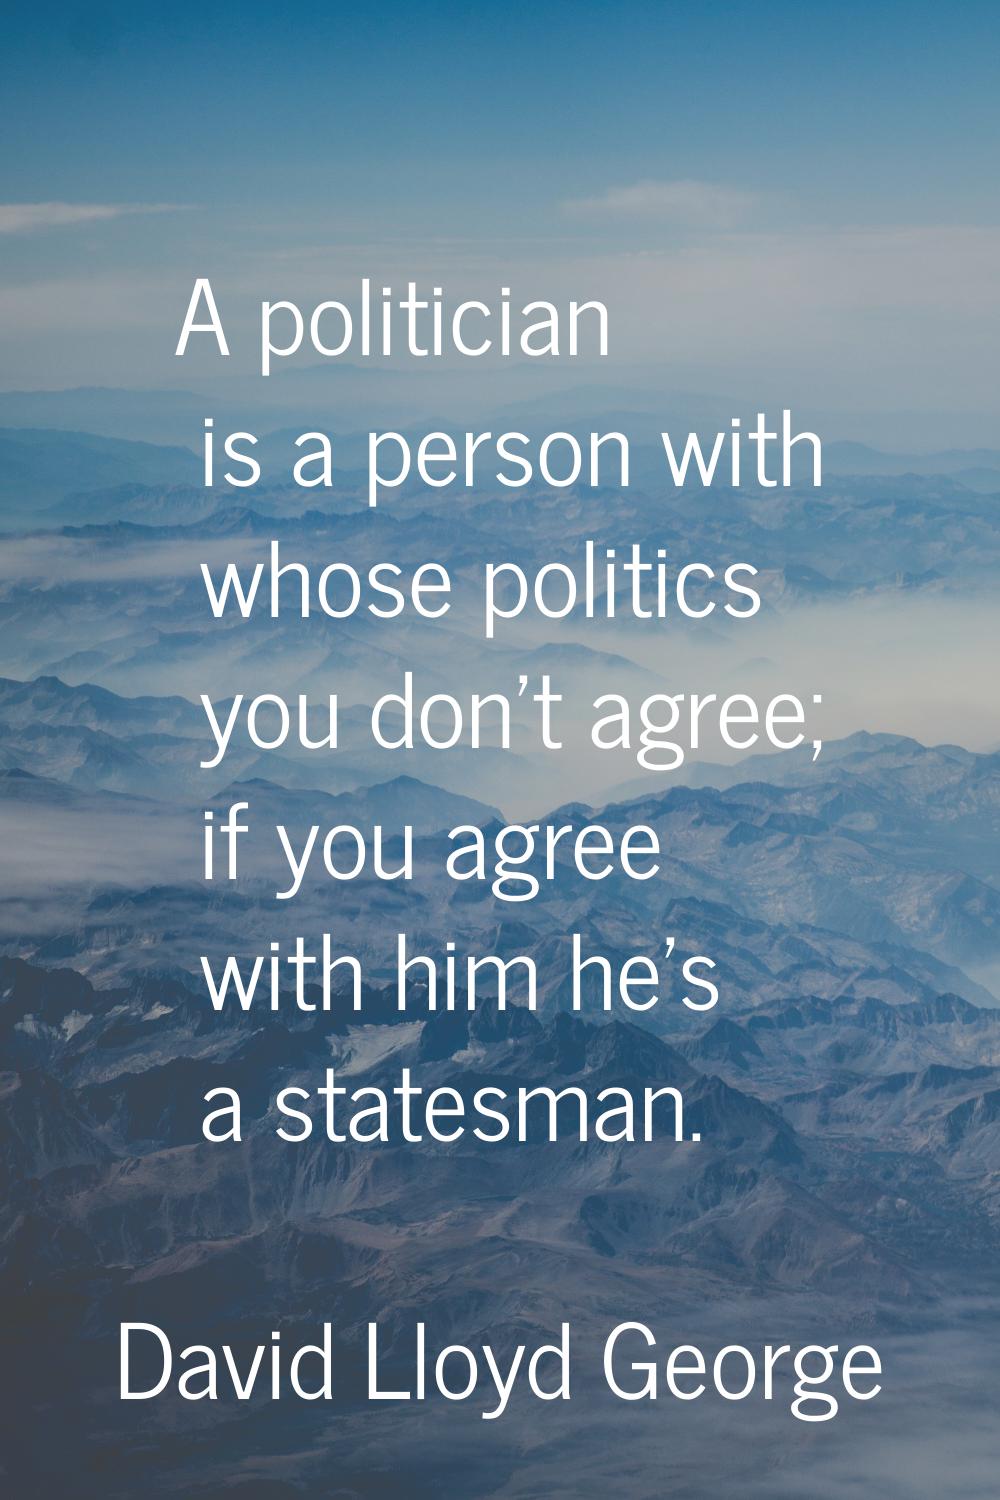 A politician is a person with whose politics you don't agree; if you agree with him he's a statesma